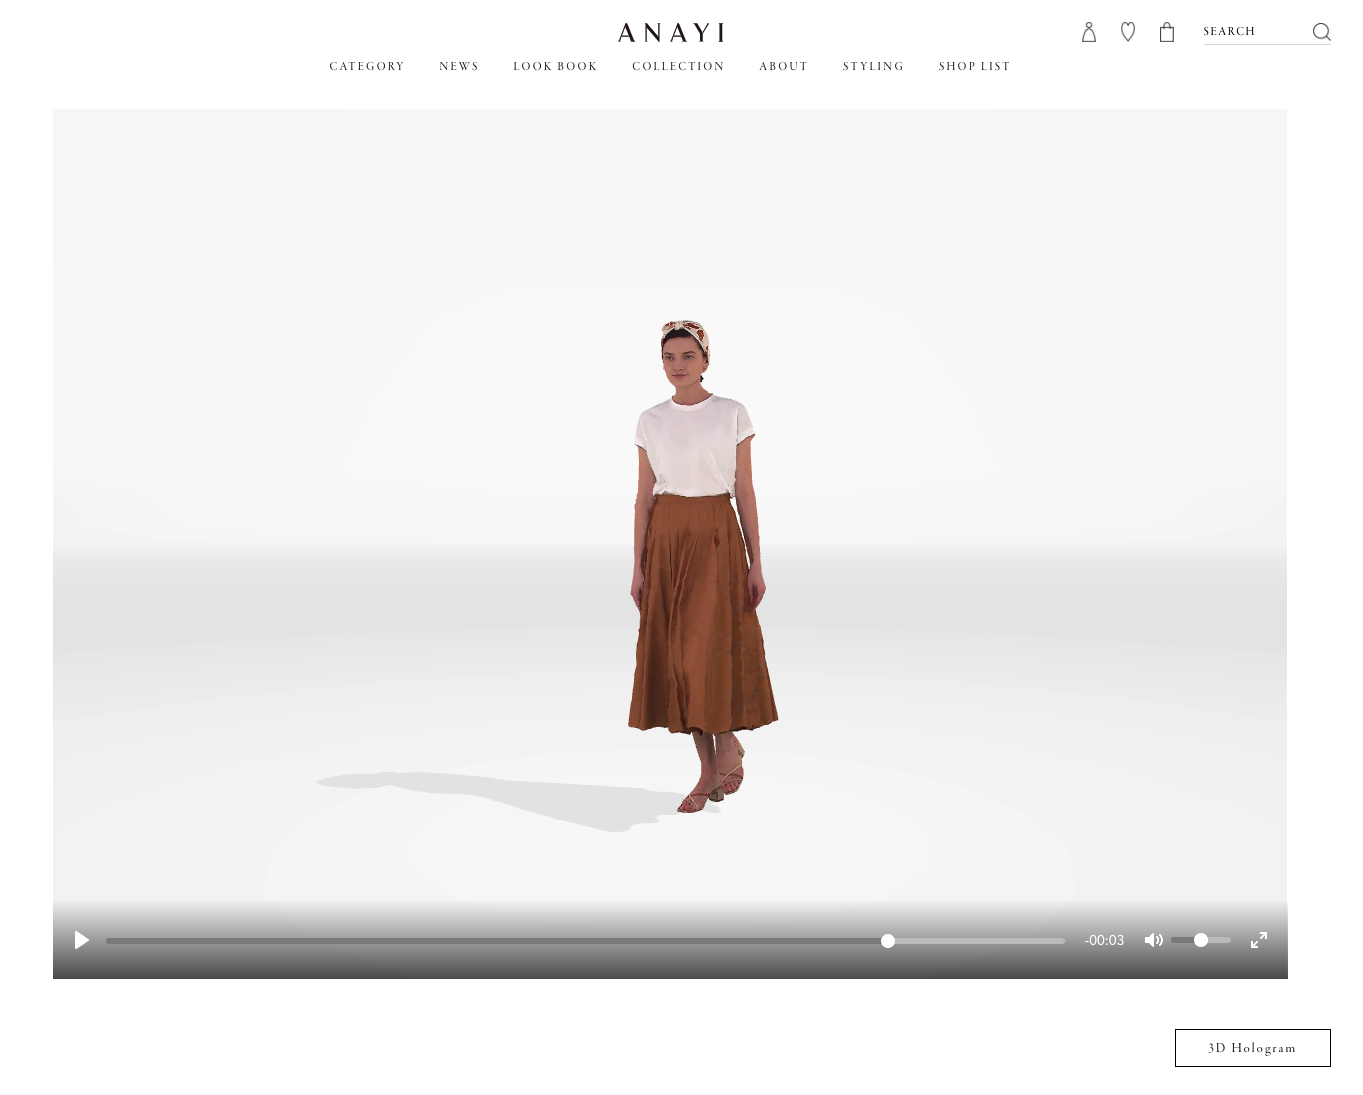 Japanese clothing brand ANAYI updates its ecommerce site with a